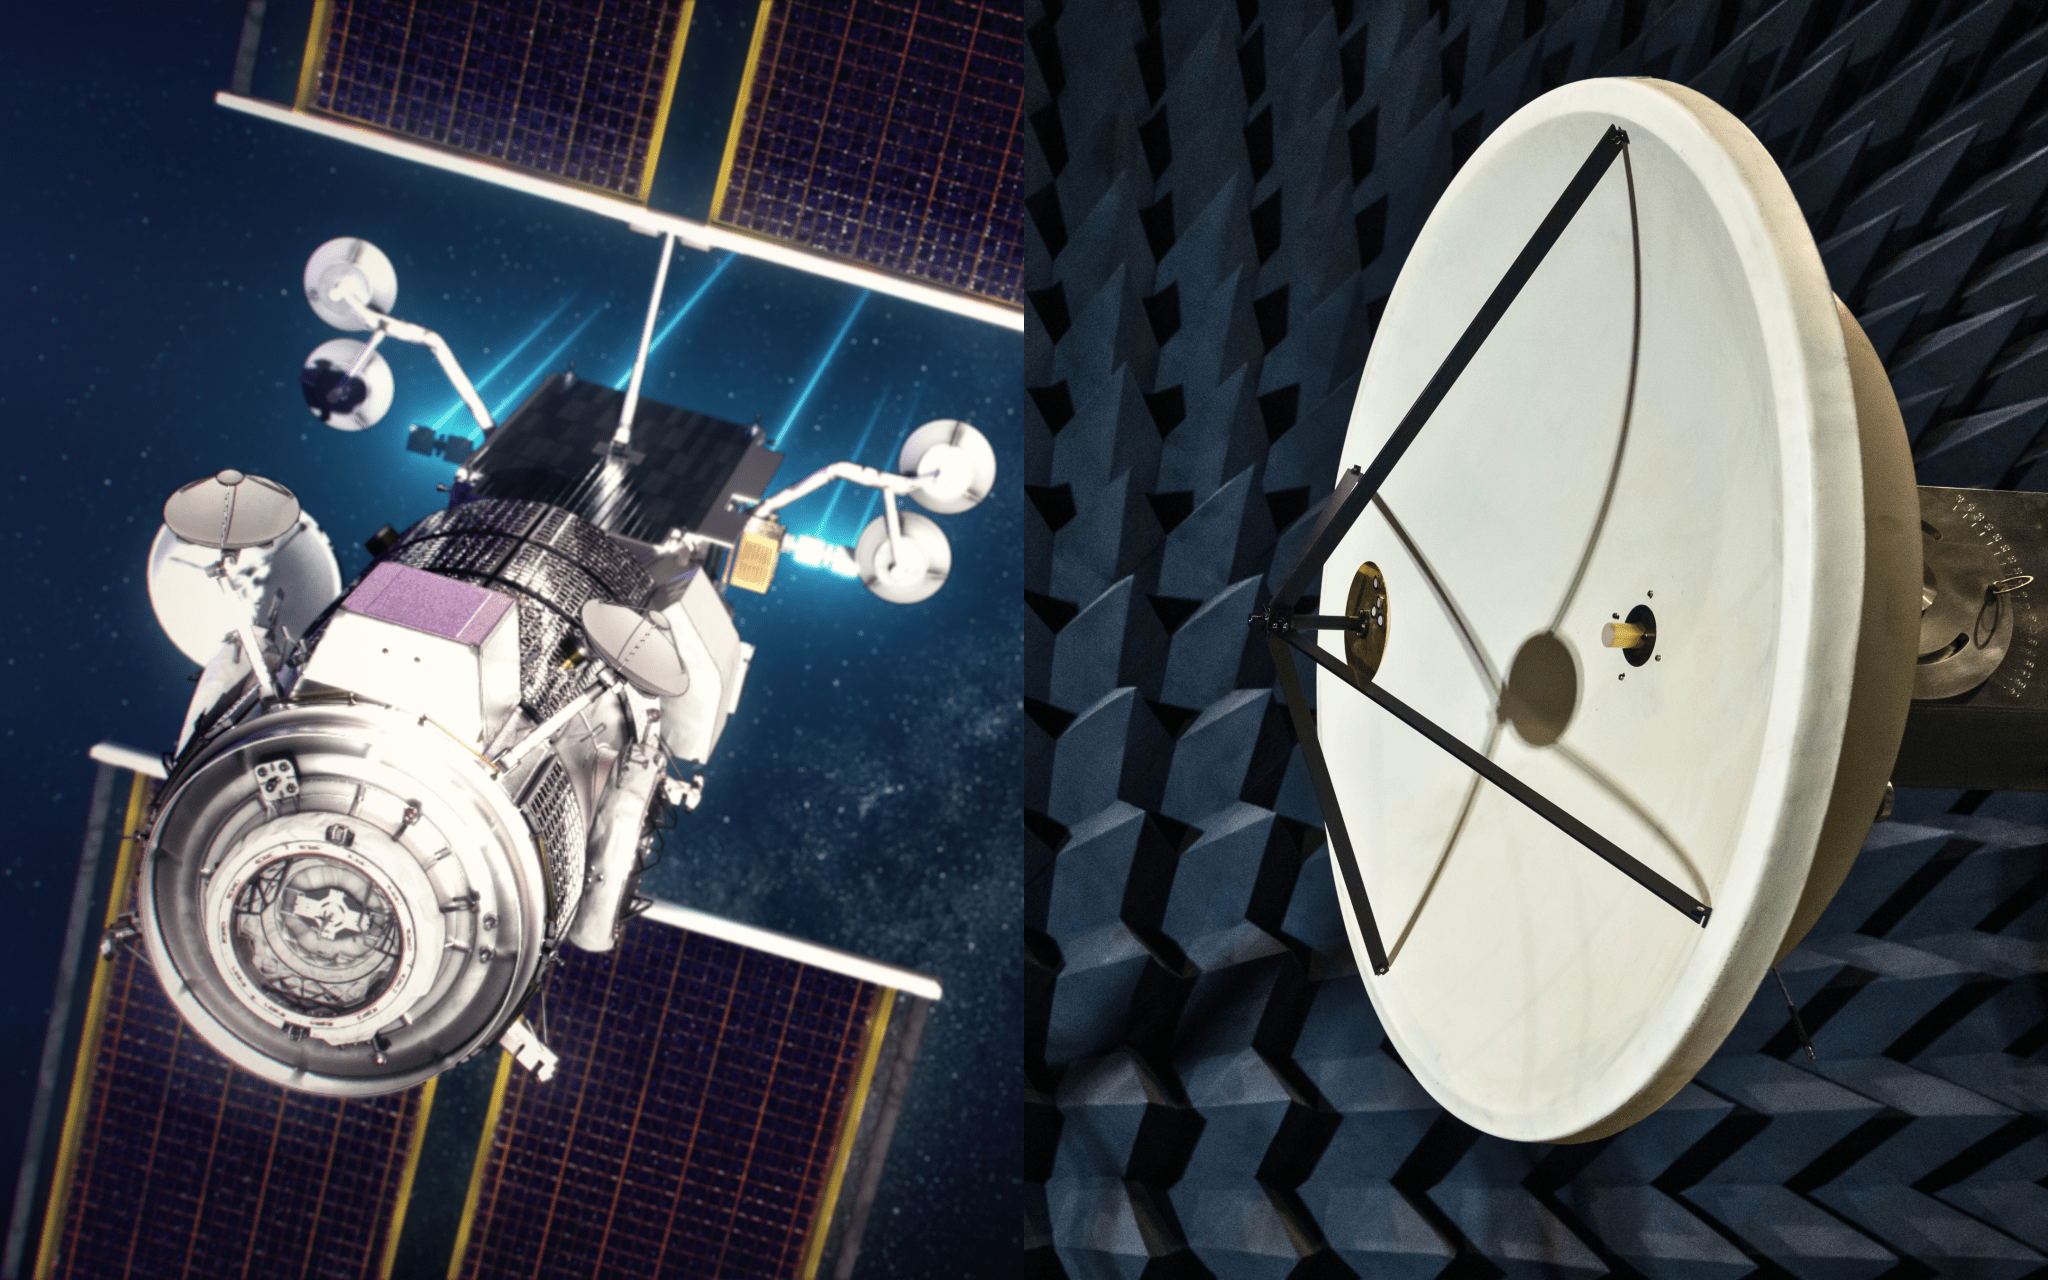 Left: An artist's rendering of Gateway space station's Power and Propulsion Element (PPE) and Habitation and Logistics Outpost (HALO) in lunar orbit. The image showcases the space station's intricate design, including solar panels, antennas, and docking ports against a starry backdrop. Right: A photograph of an antenna being tested in an anechoic chamber at NASA’s Johnson Space Center. The antenna, mounted on a stand, is positioned in a room lined with blue, sound-absorbing foam.